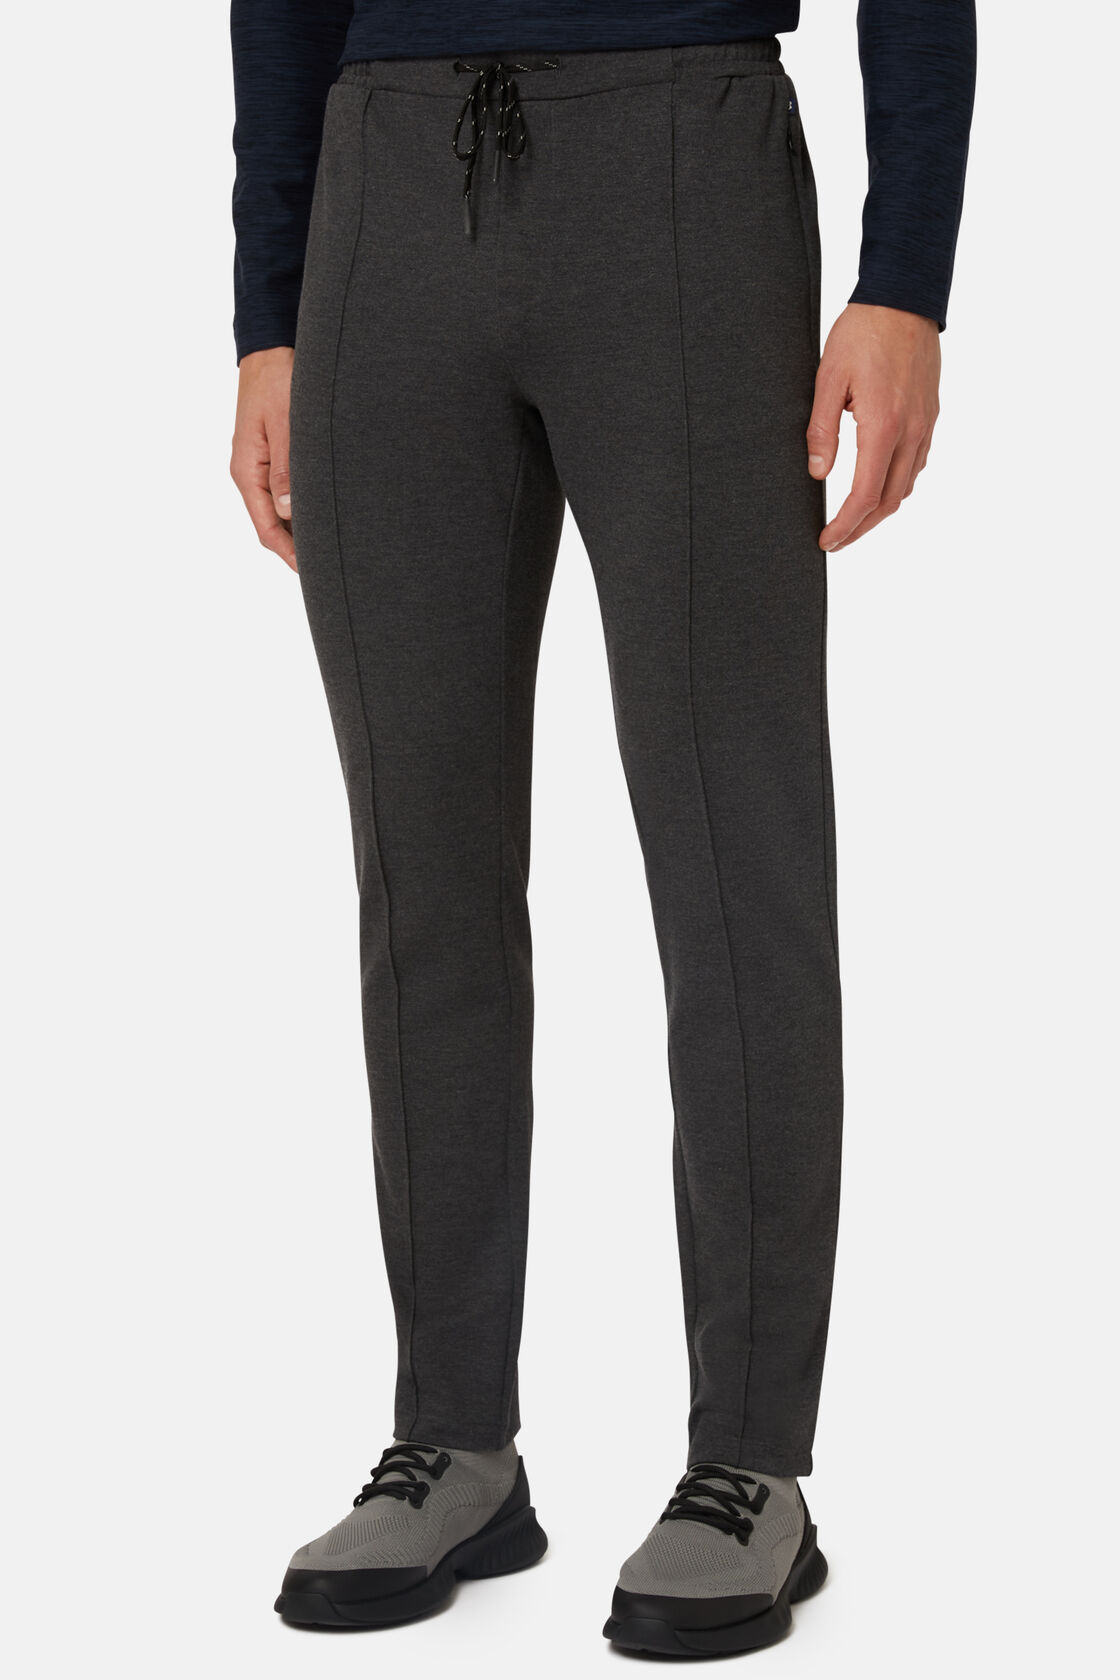 Stretch Interlock Technical Fabric Trousers, Charcoal, hi-res